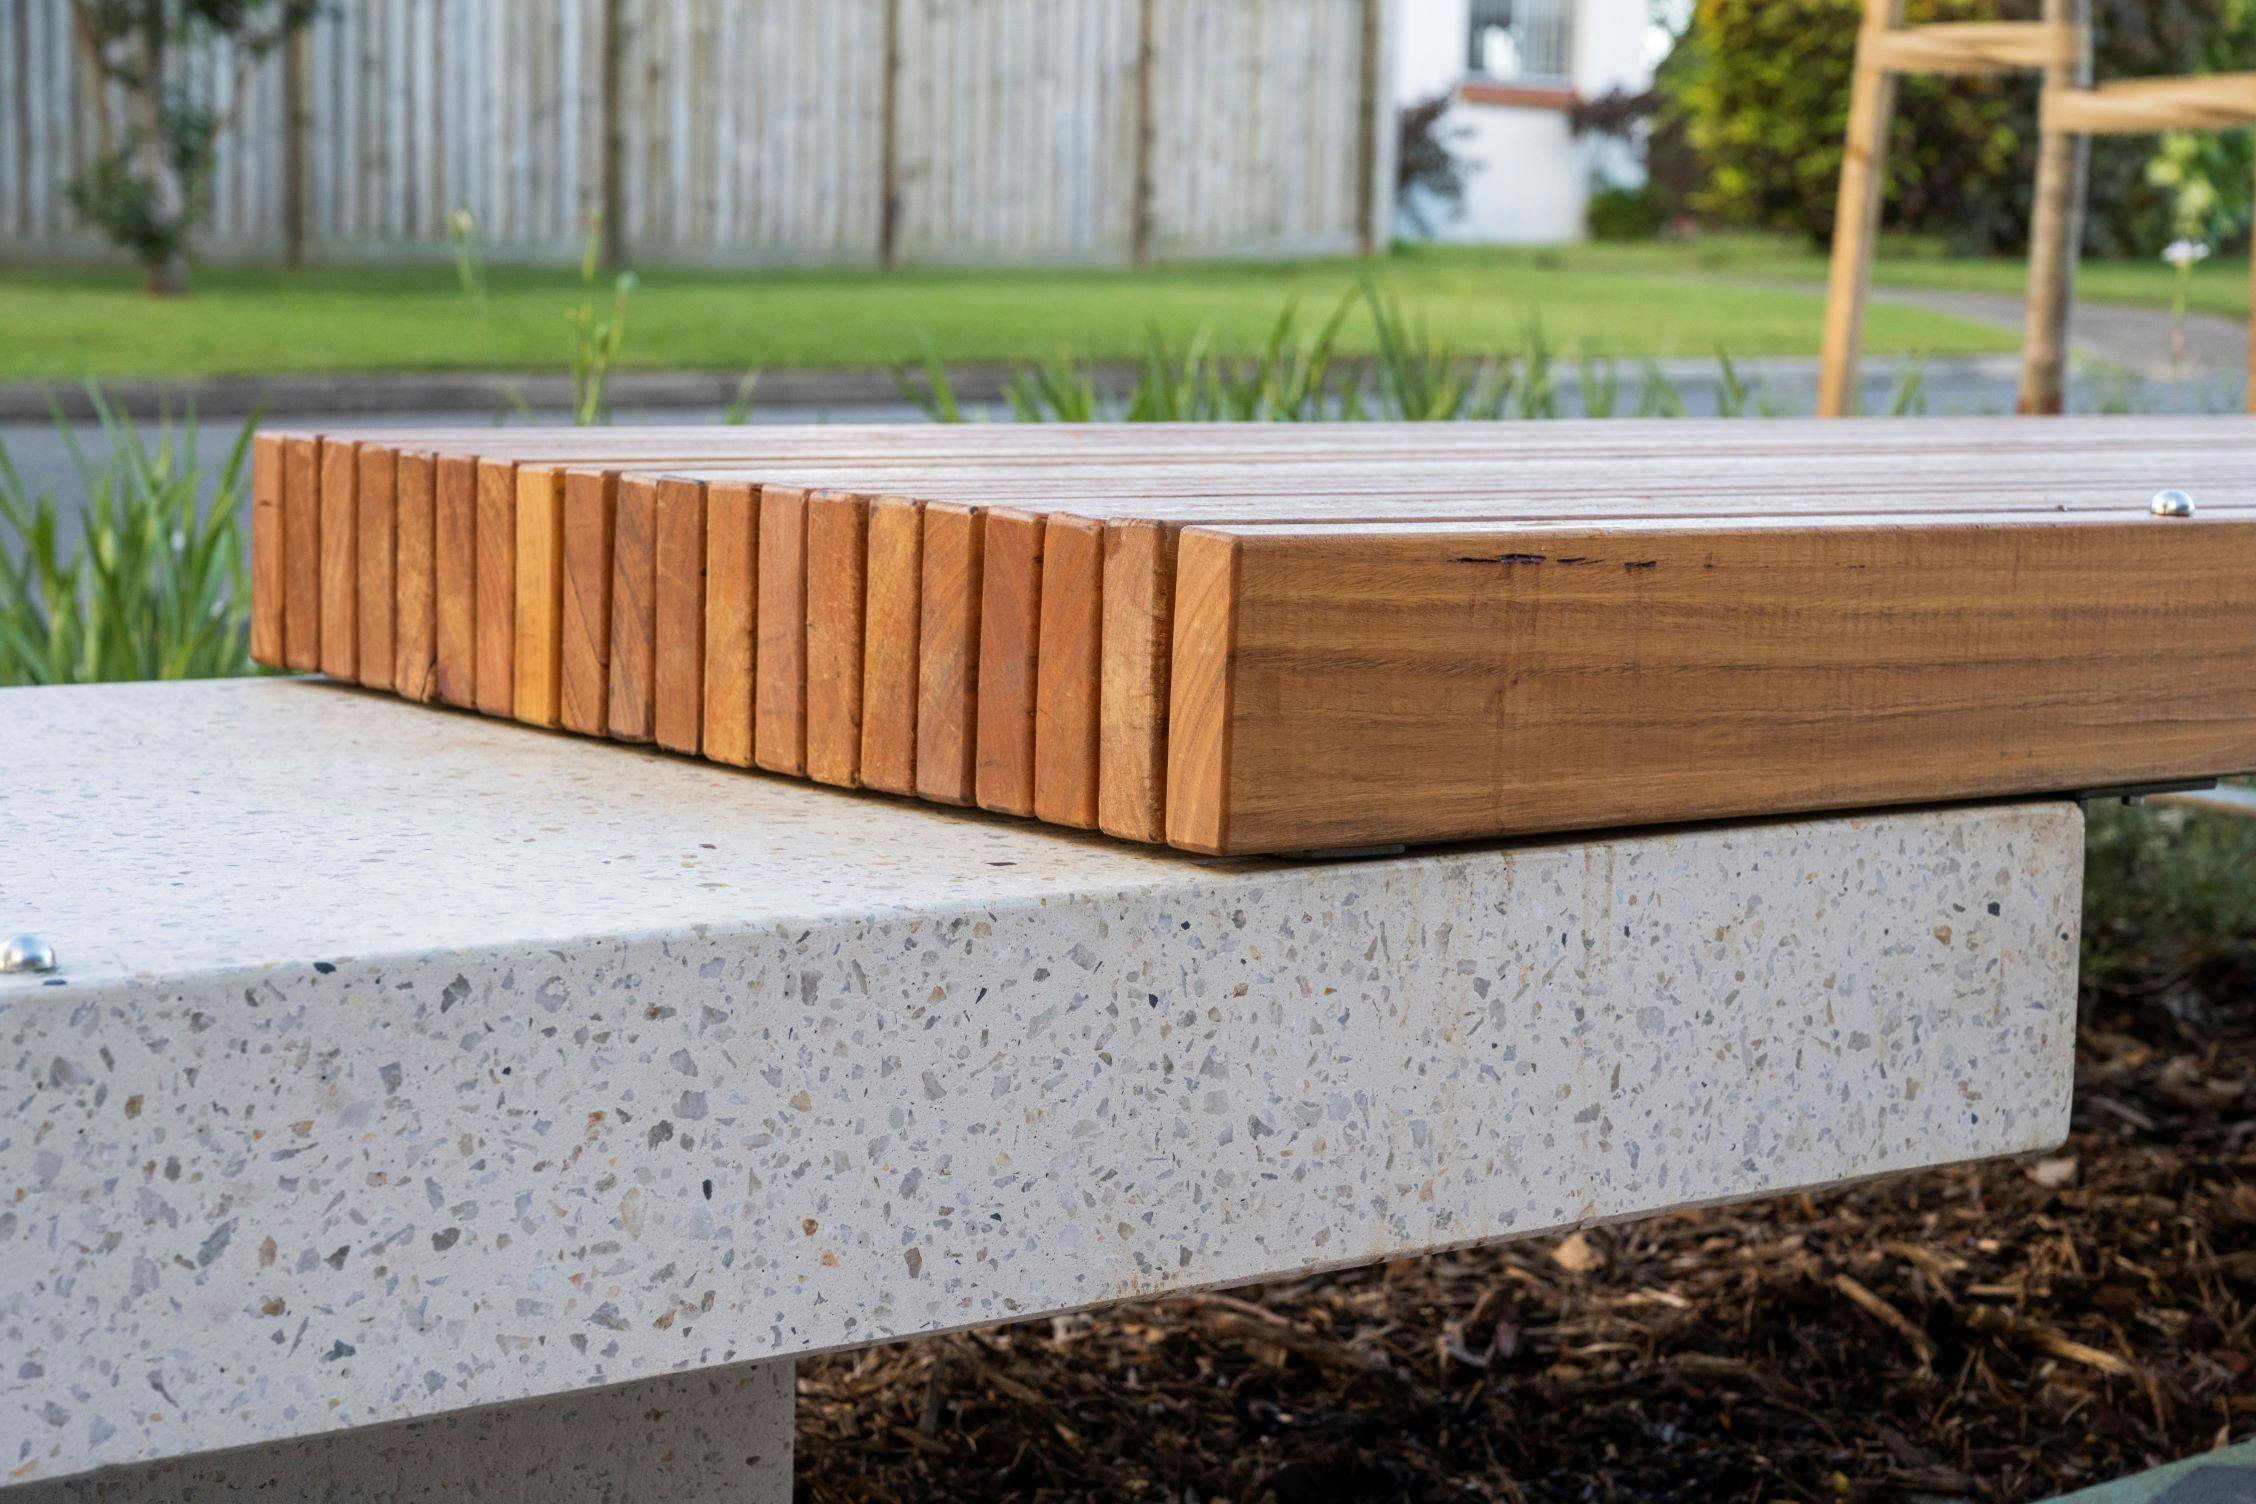 Side view close up of custom platform seating highlighting the timber slat and honed aggregate concrete finish.  